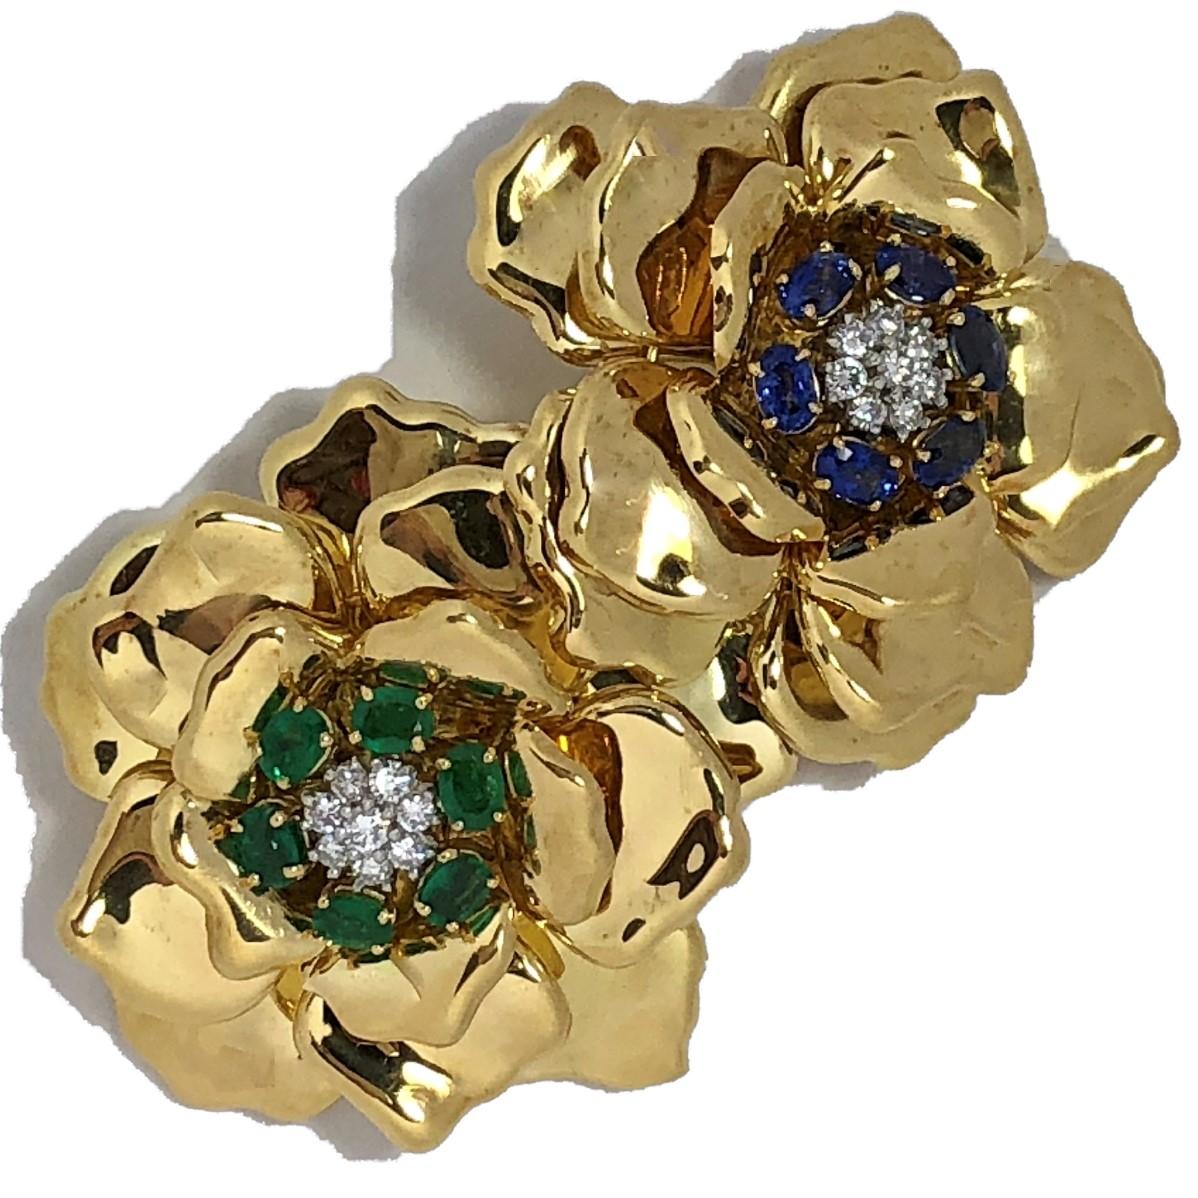 Made by Emis Beros, this outstanding, double flower brooch is set with six faceted, oval shaped, bright green emeralds surrounding eight round brilliant cut diamonds, and with six faceted, oval shaped bright blue sapphires surrounding eight round